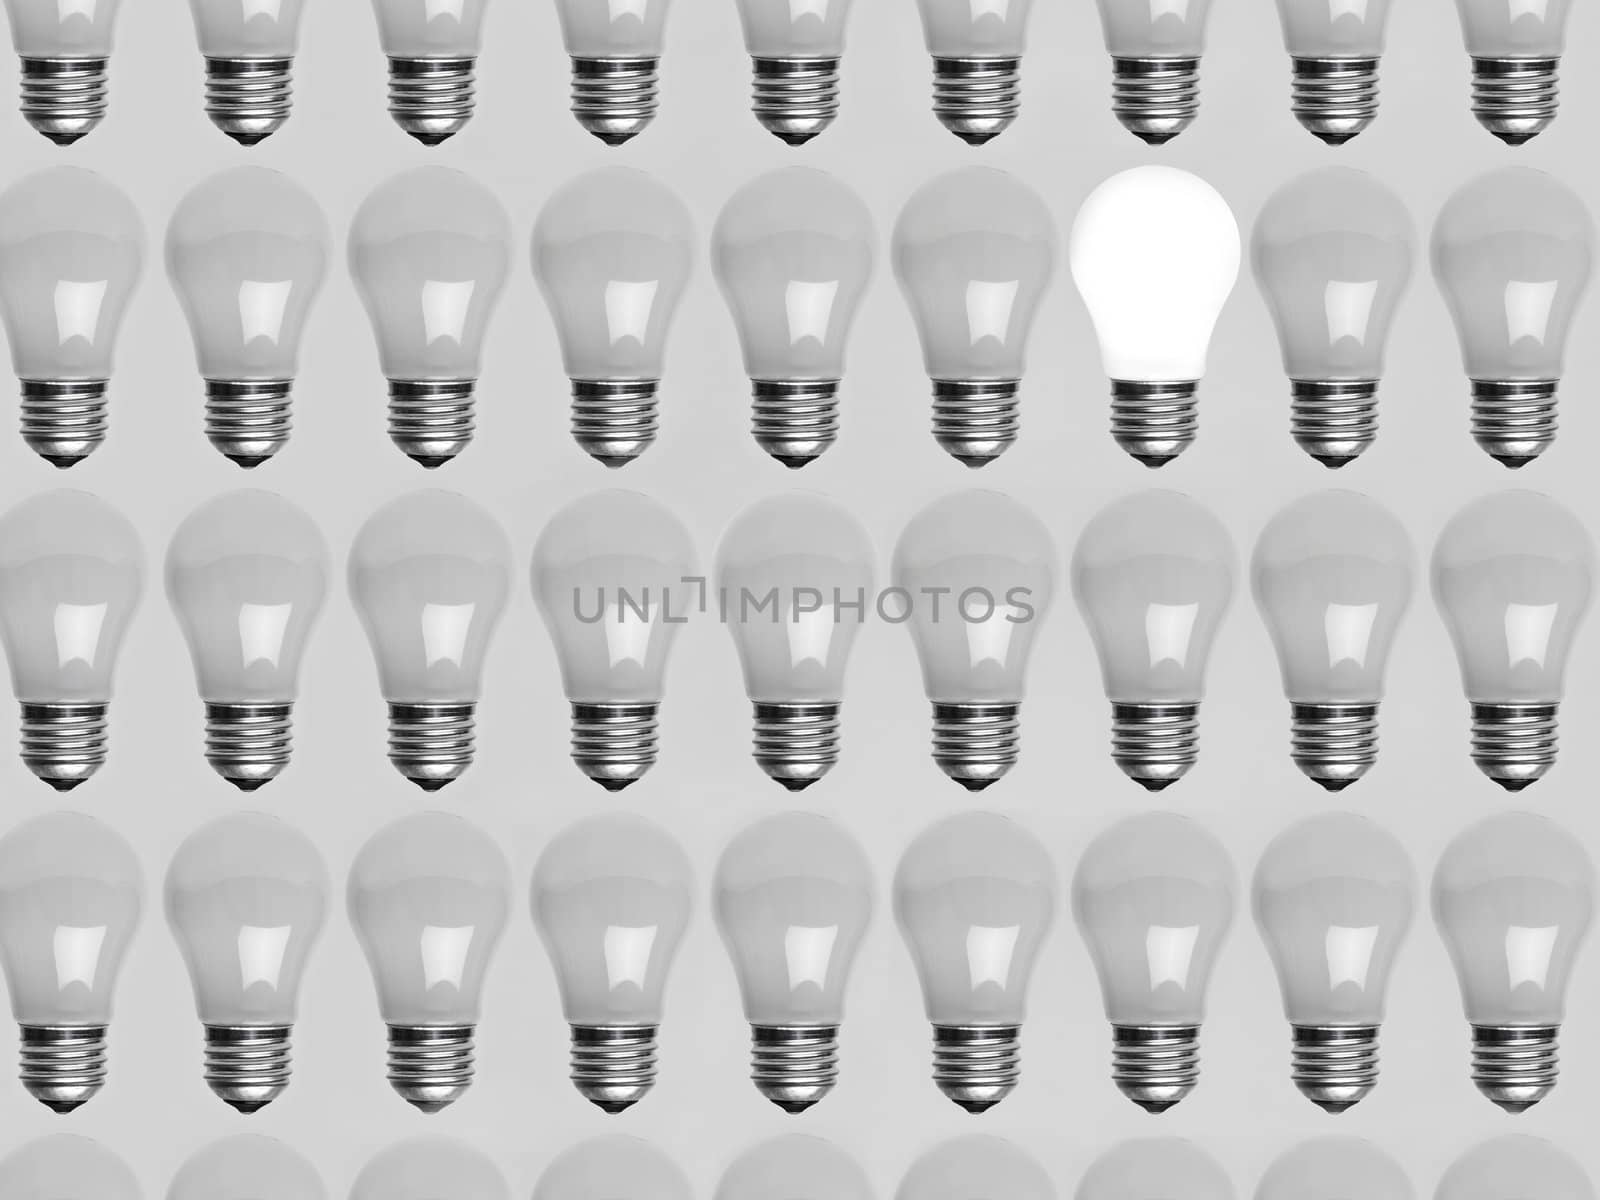 Collage of light bulbs by gemenacom